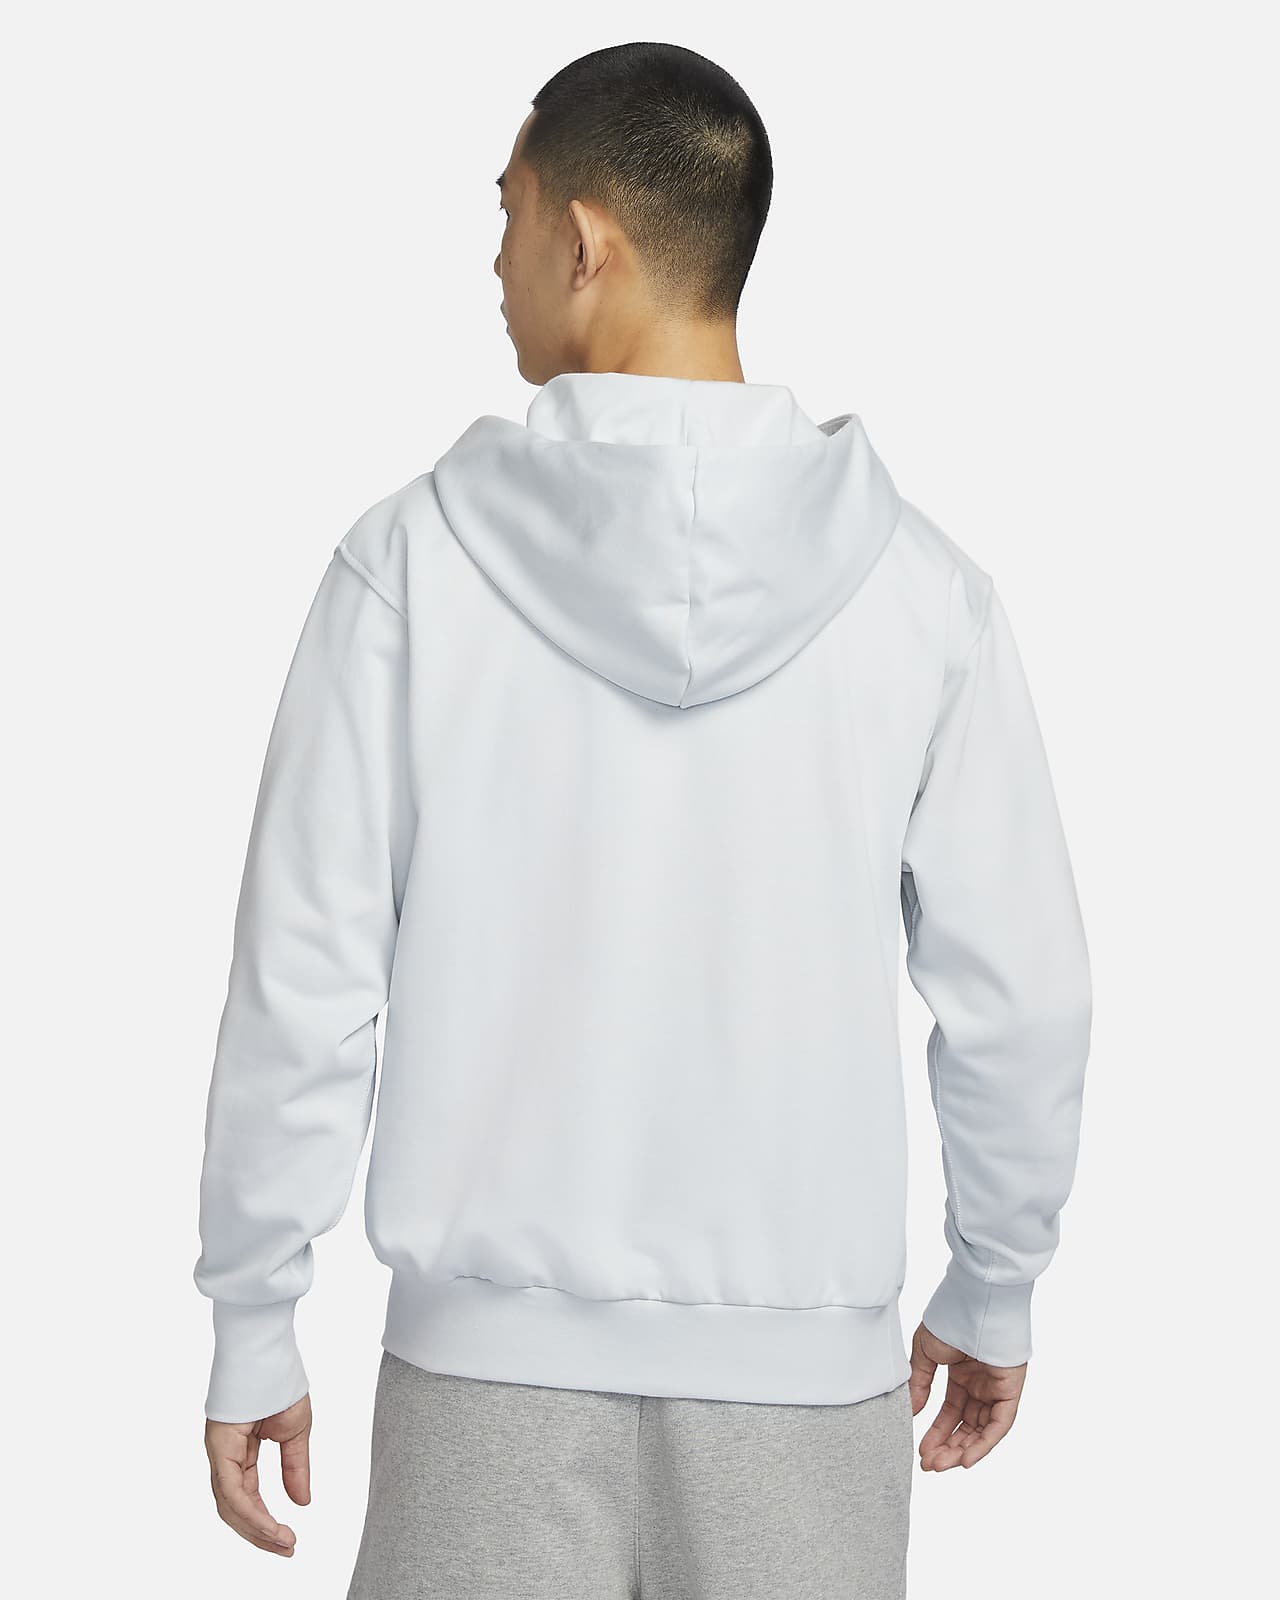 Nike Standard Issue Men's Dri-FIT Pullover Basketball Hoodie